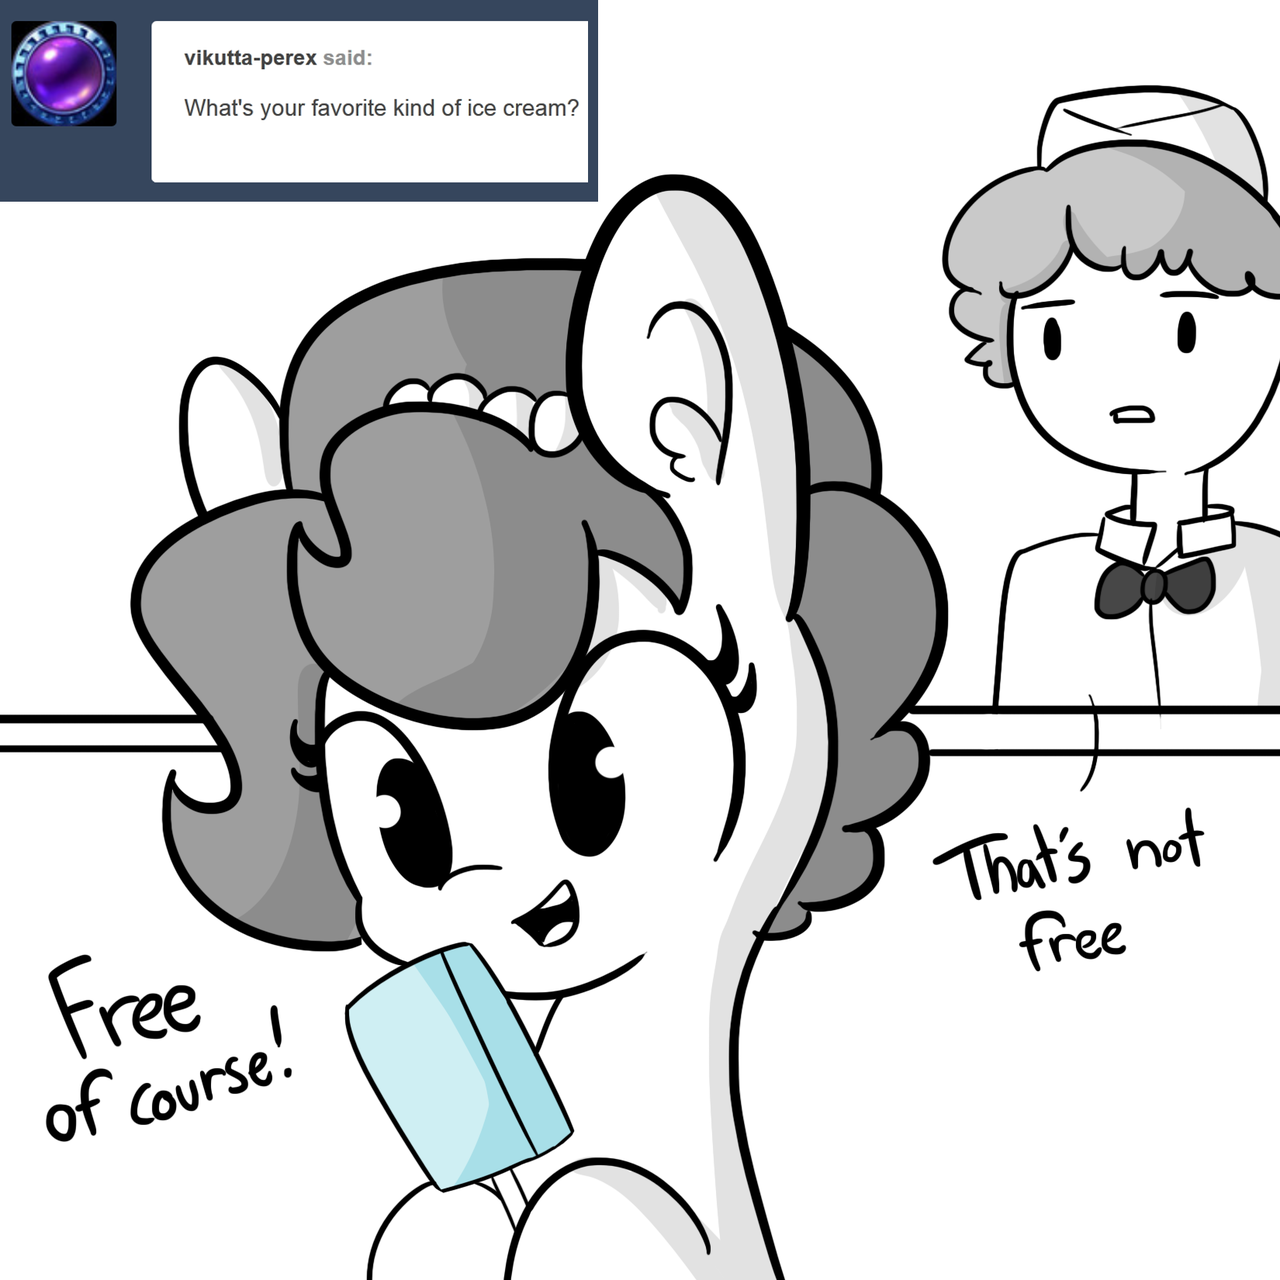 Horse Wife